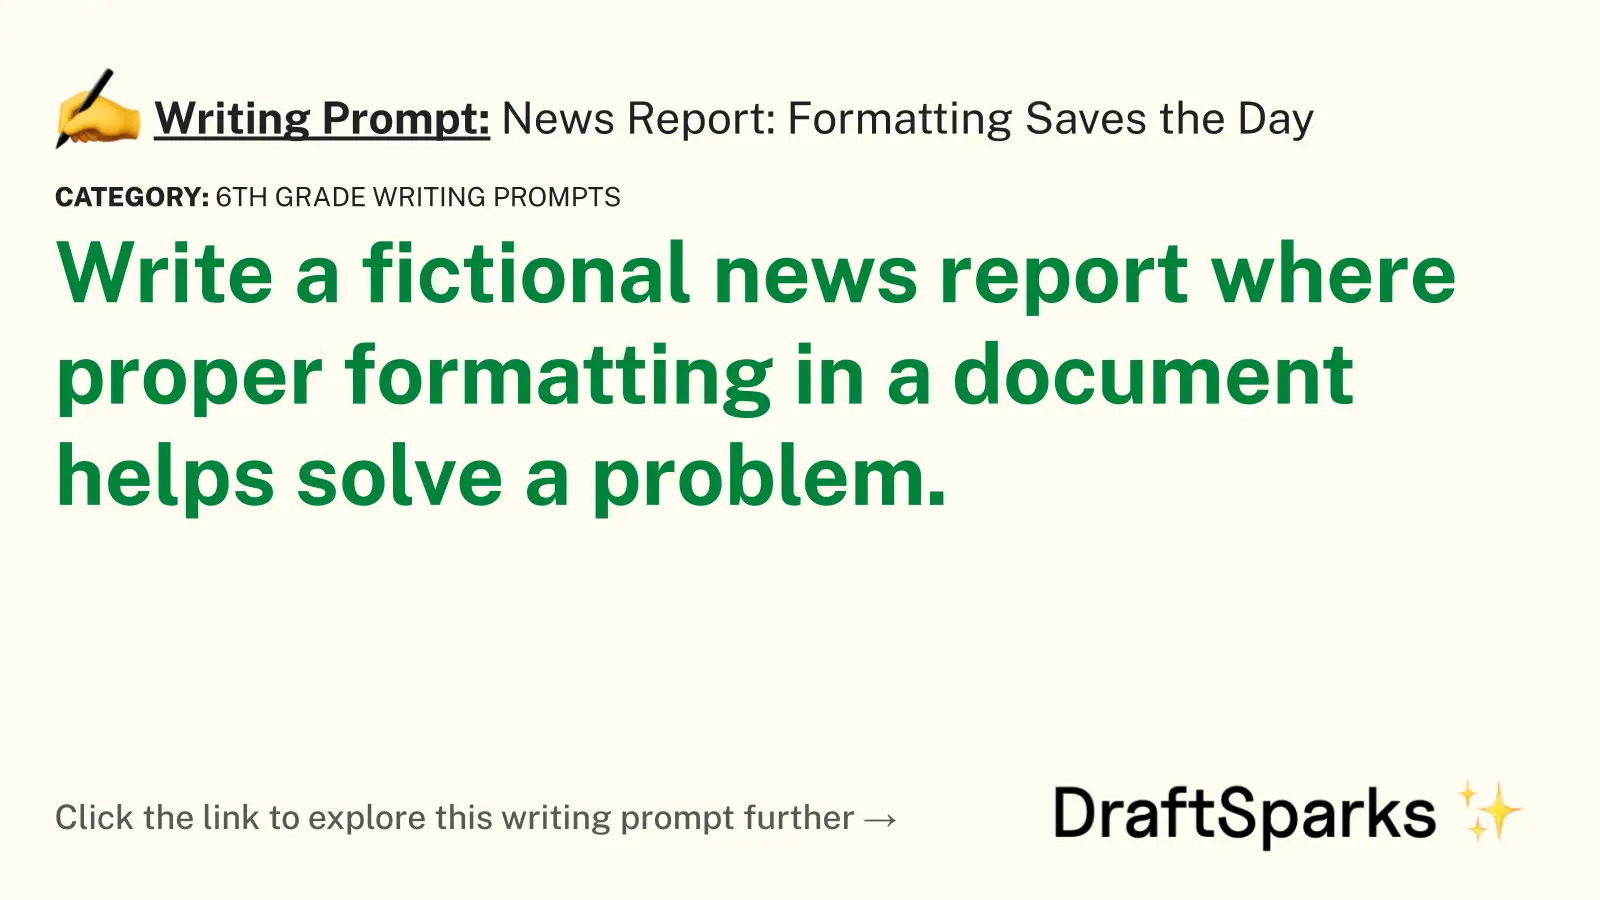 News Report: Formatting Saves the Day